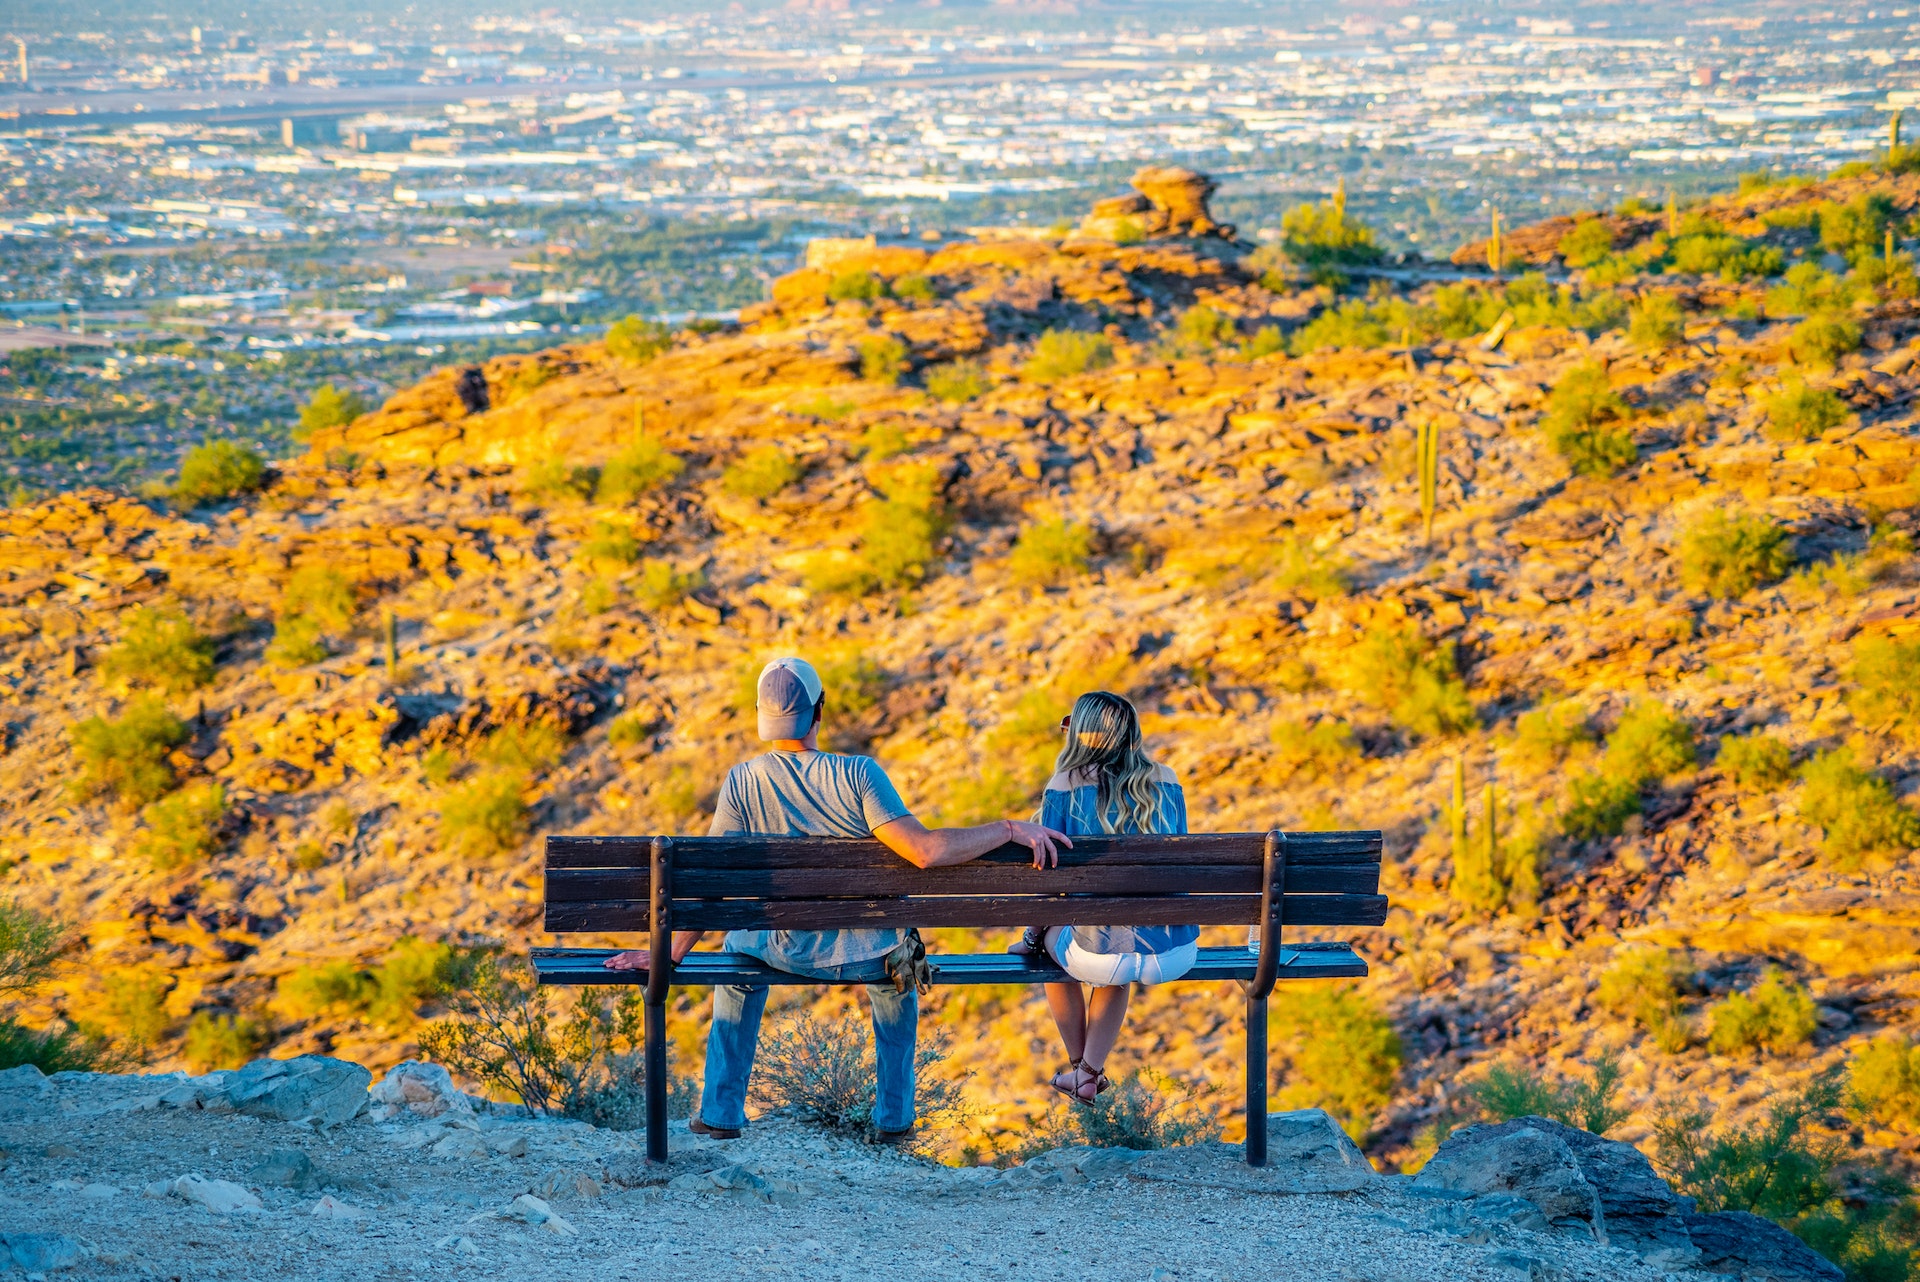 A couple sit on a bench at a lookout with the sun shining down over an arid landscape